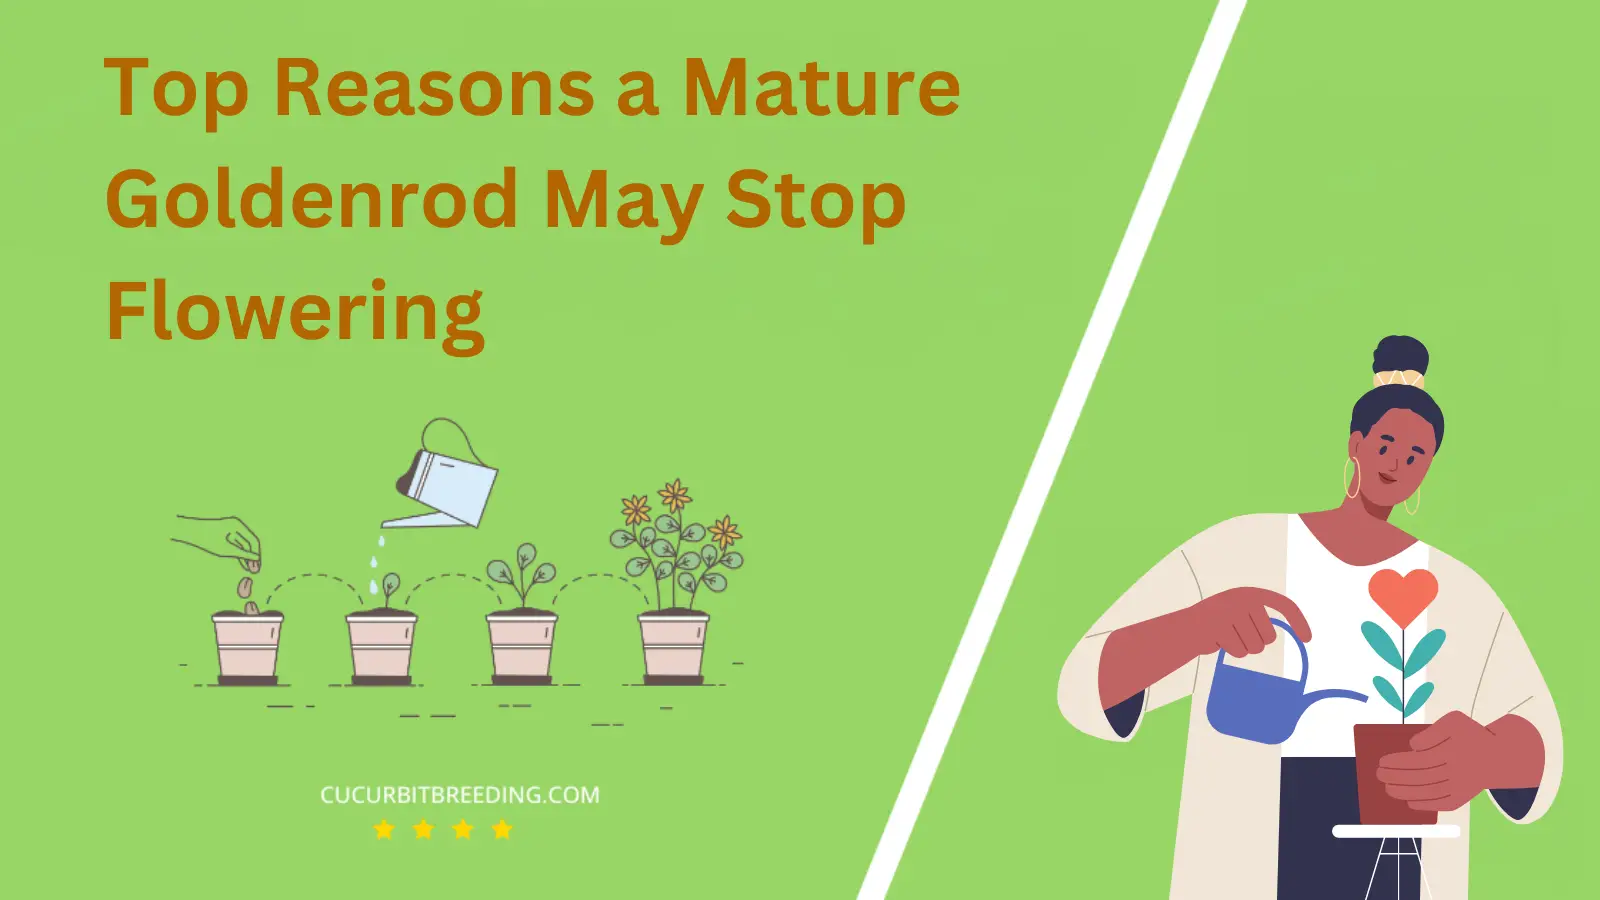 Top Reasons a Mature Goldenrod May Stop Flowering